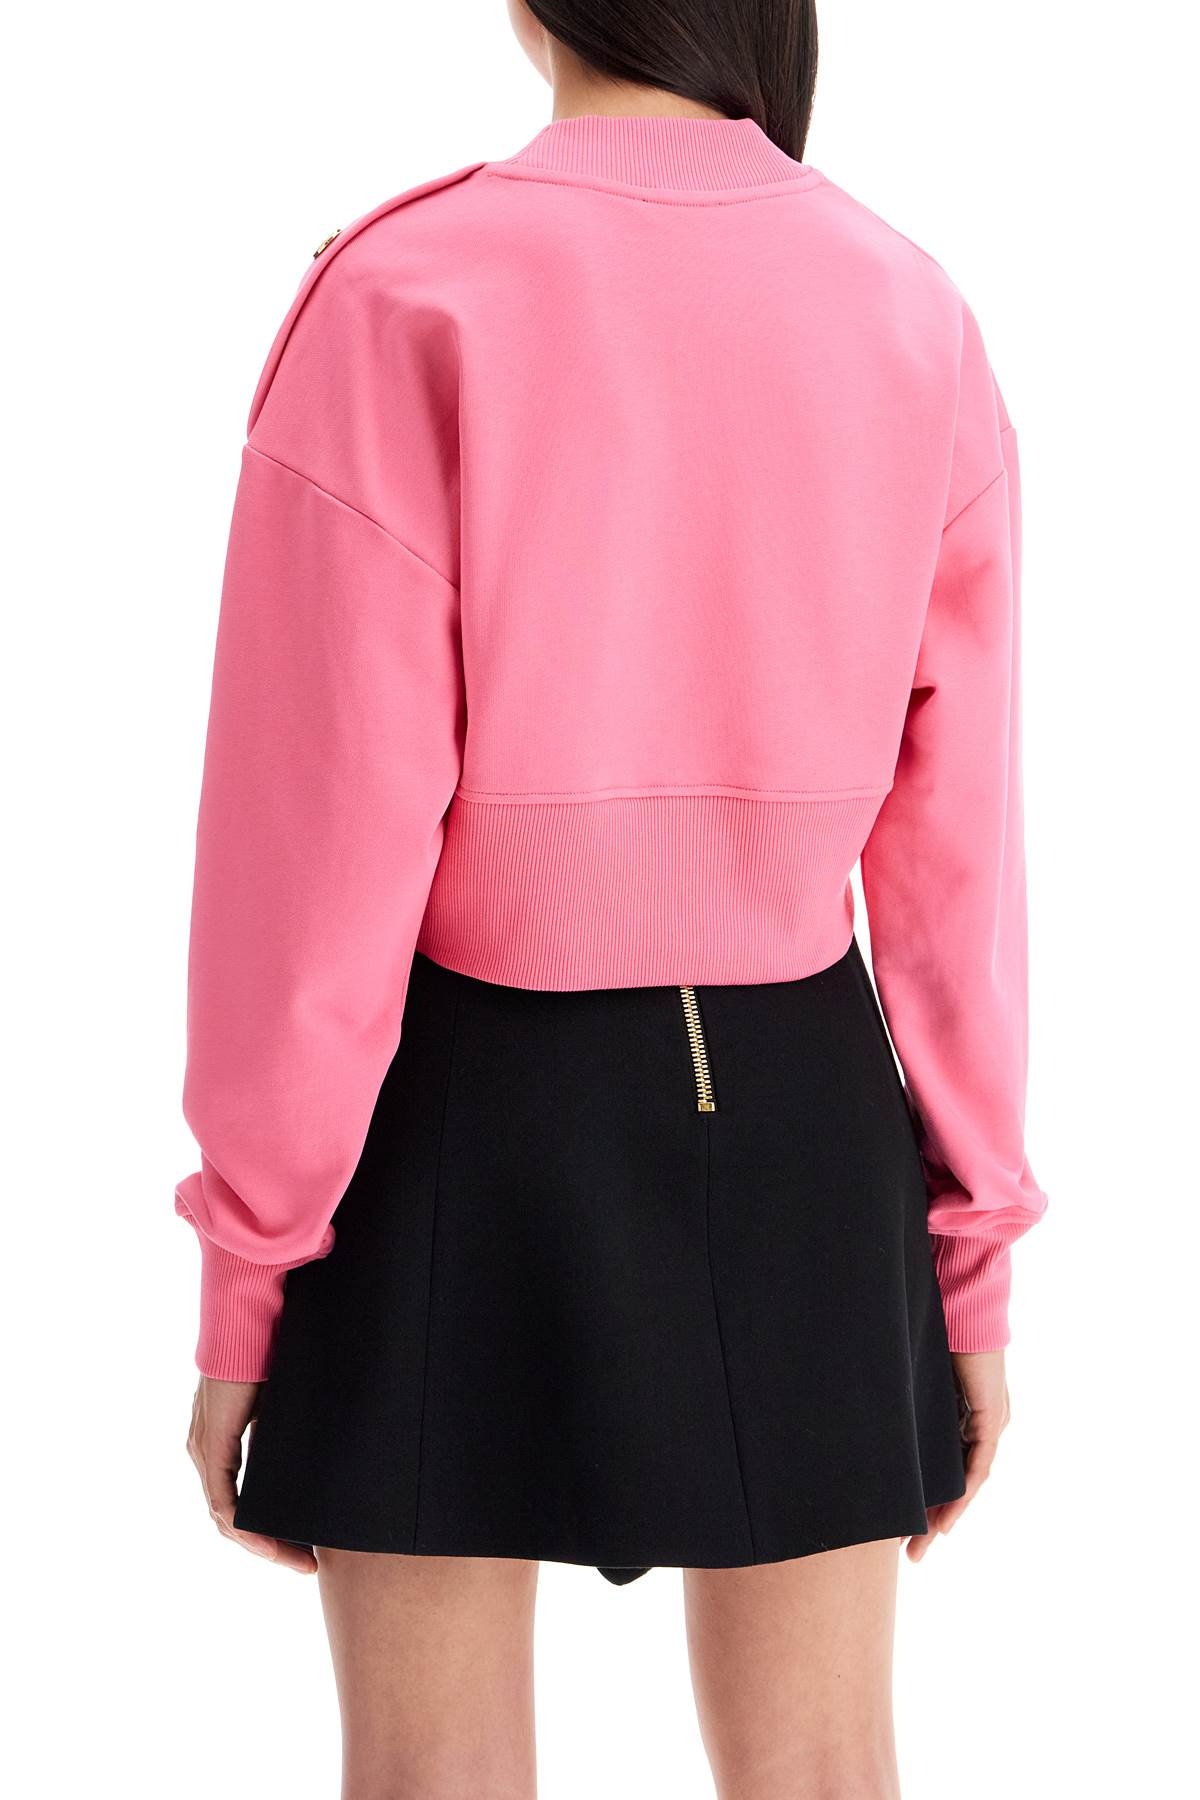 Balmain Cropped Sweatshirt With Buttons - 4